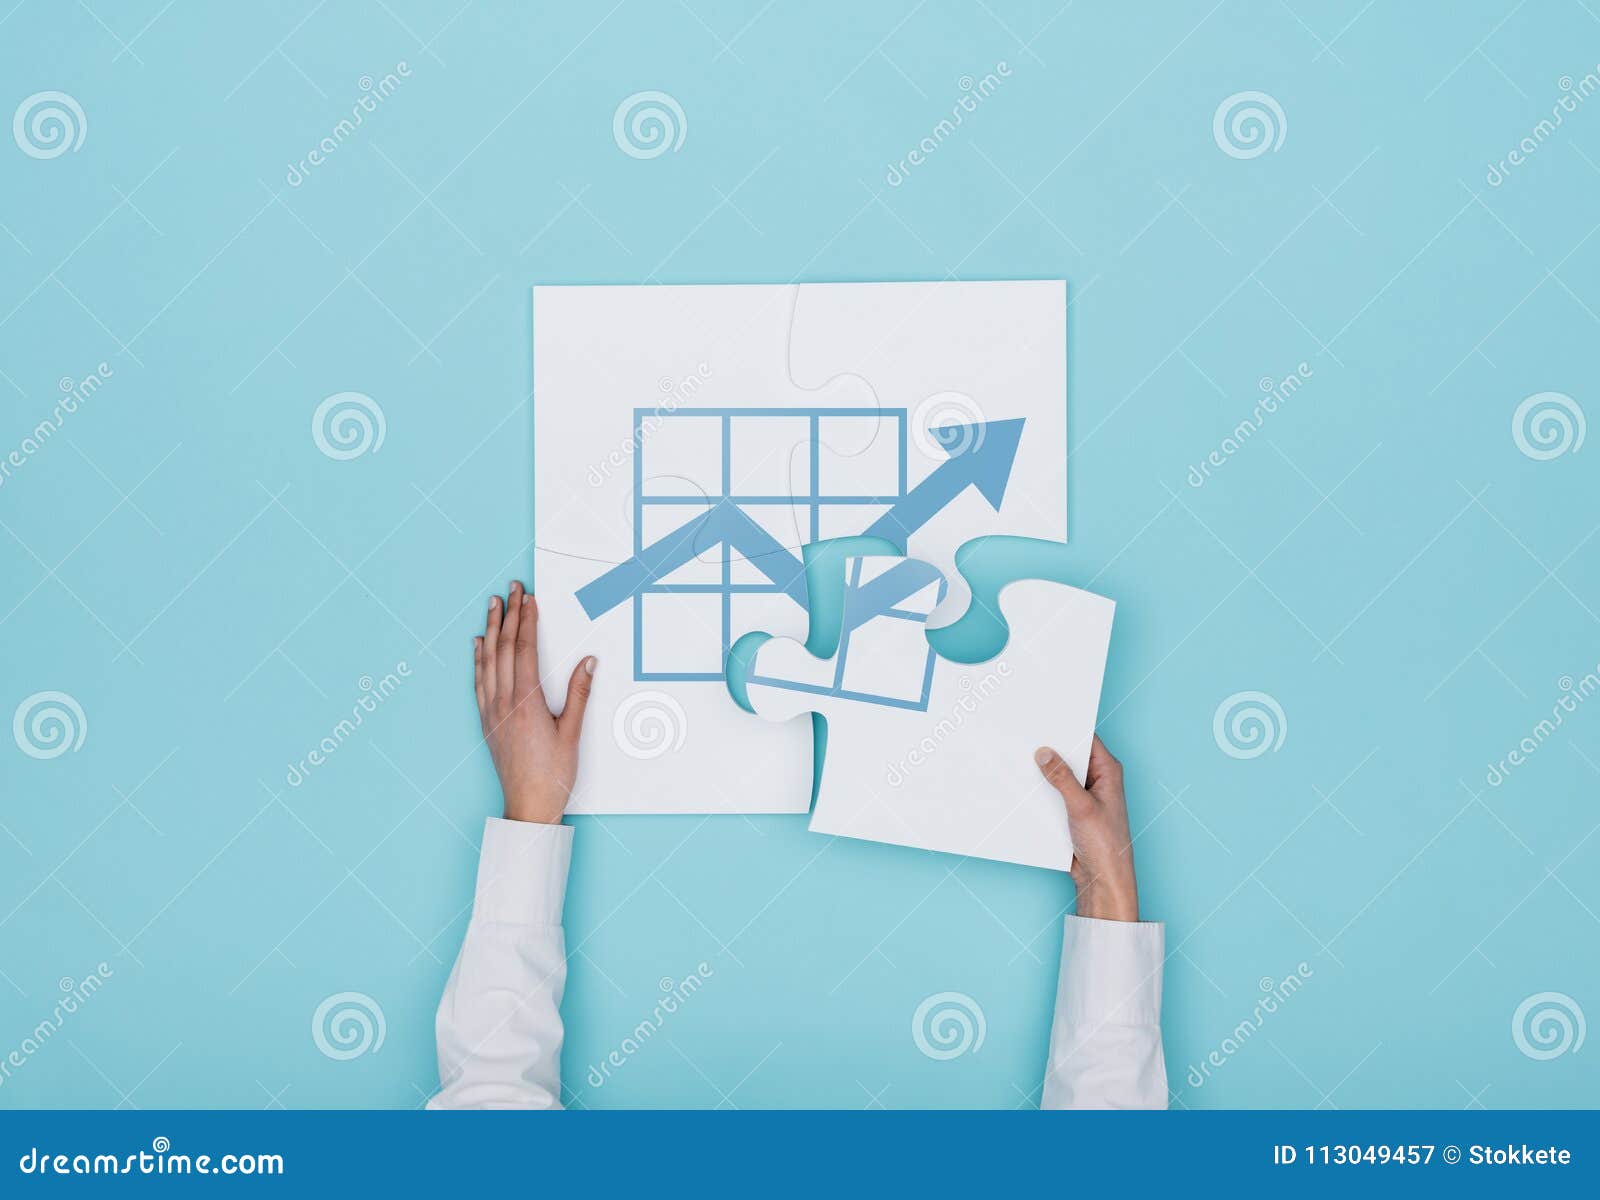 woman completing a puzzle with a graph icon